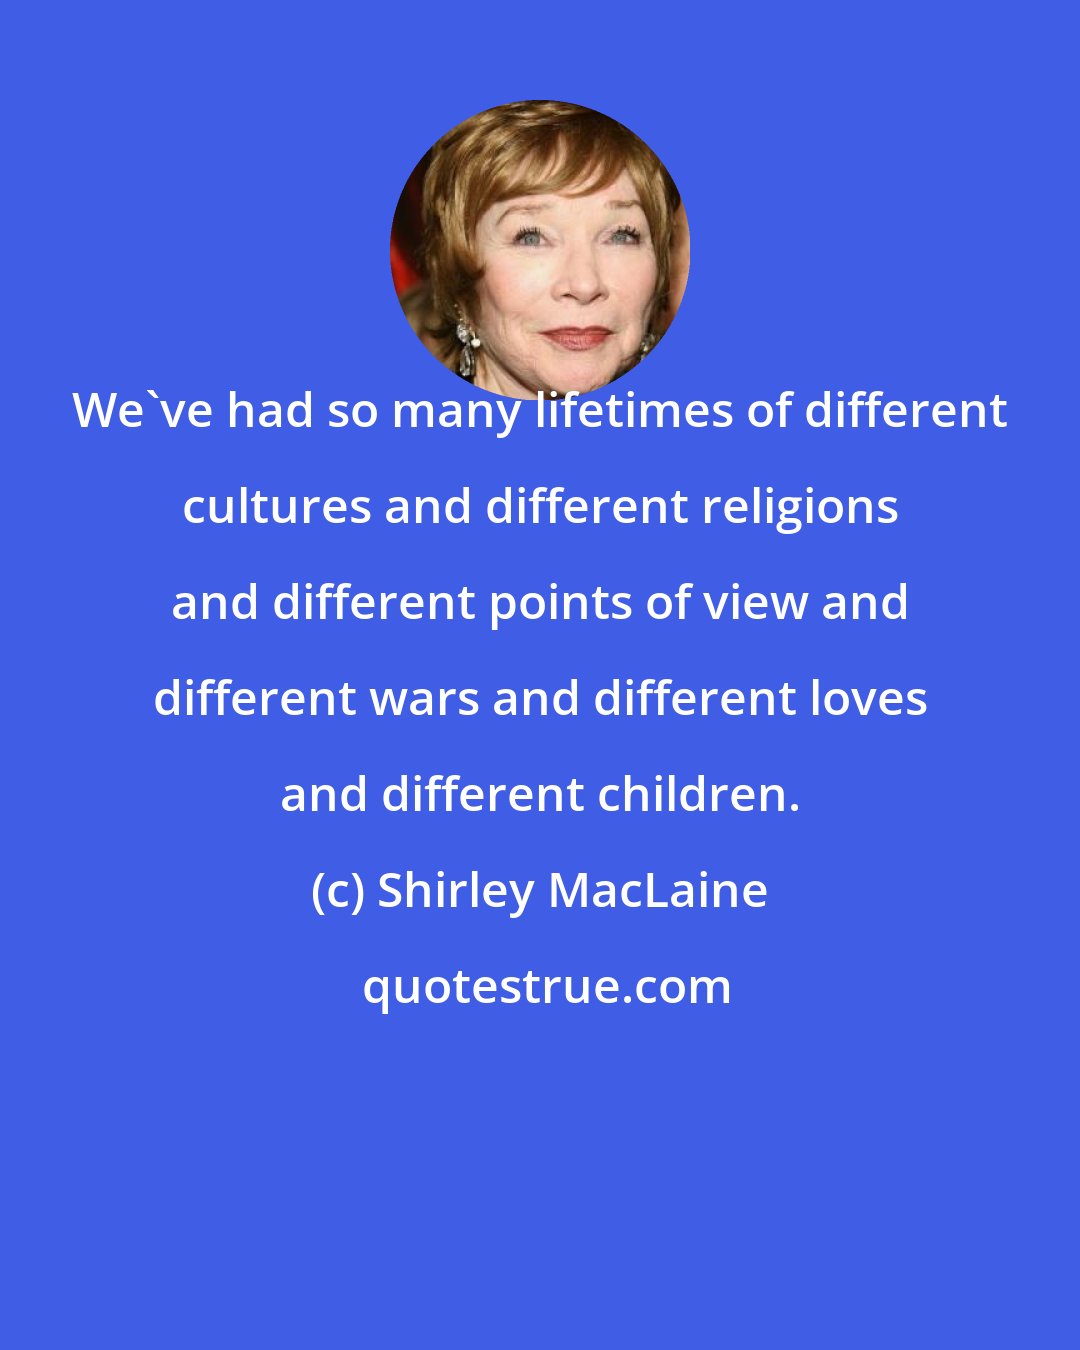 Shirley MacLaine: We've had so many lifetimes of different cultures and different religions and different points of view and different wars and different loves and different children.